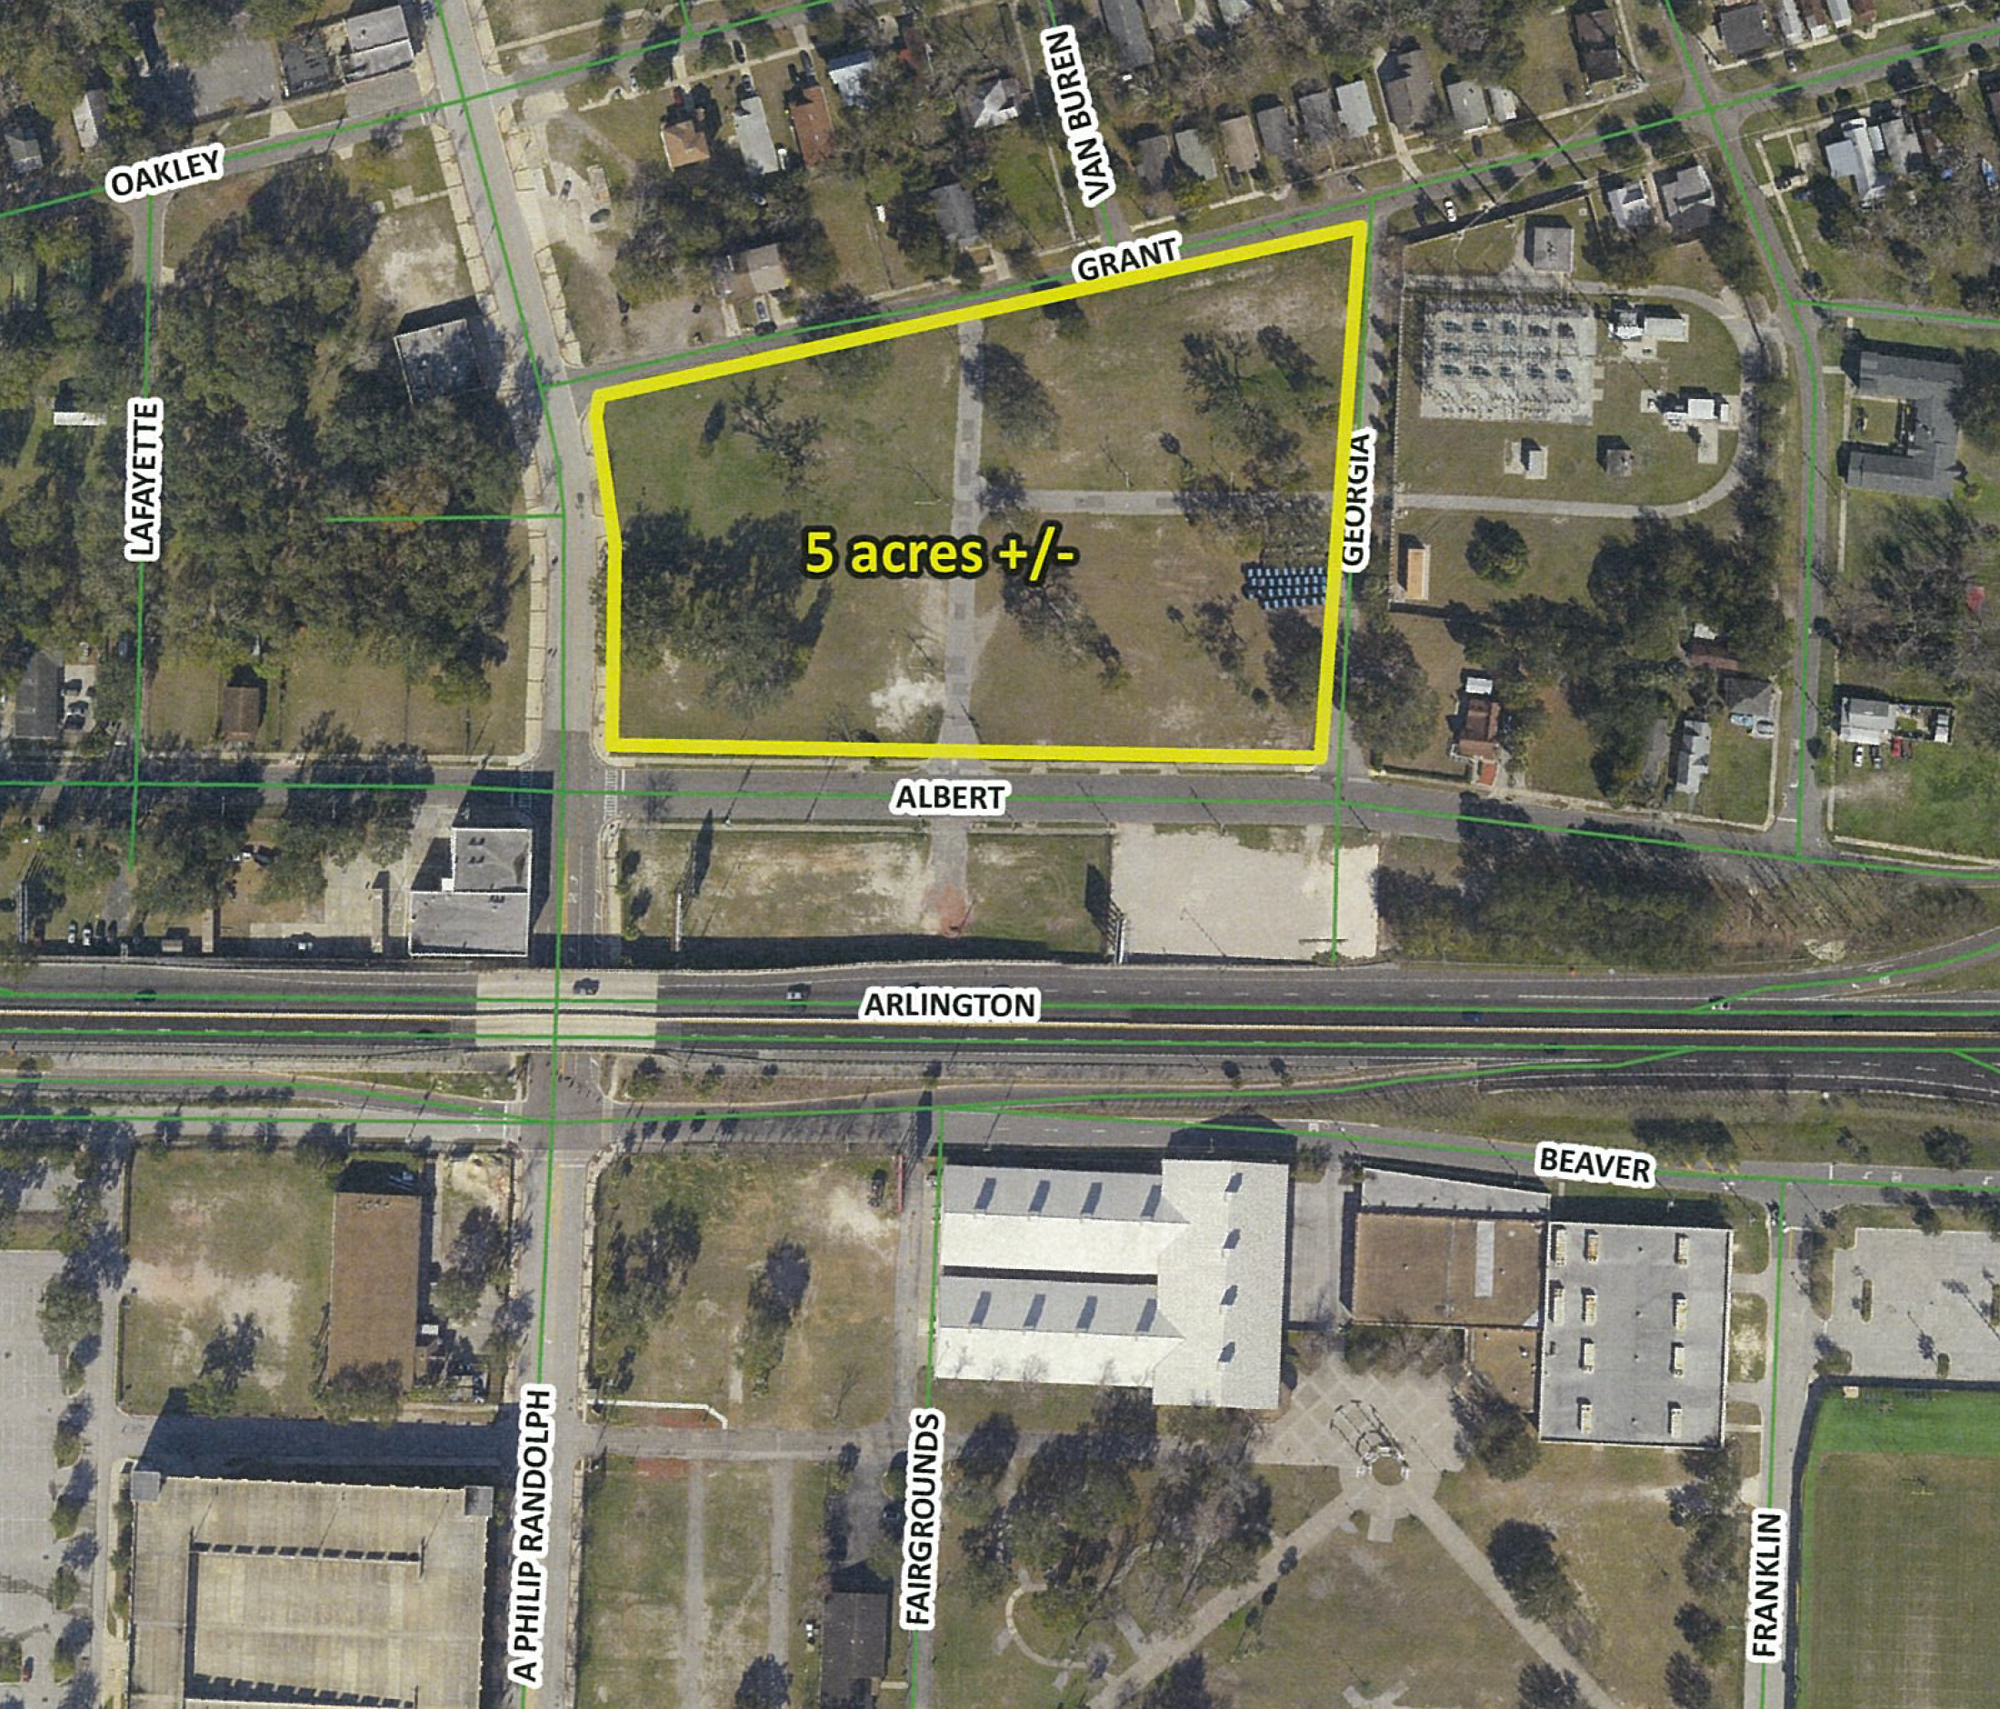 The stadium is planned at A. Philip Randolph Boulevard and Grant, Albert and Georgia streets.